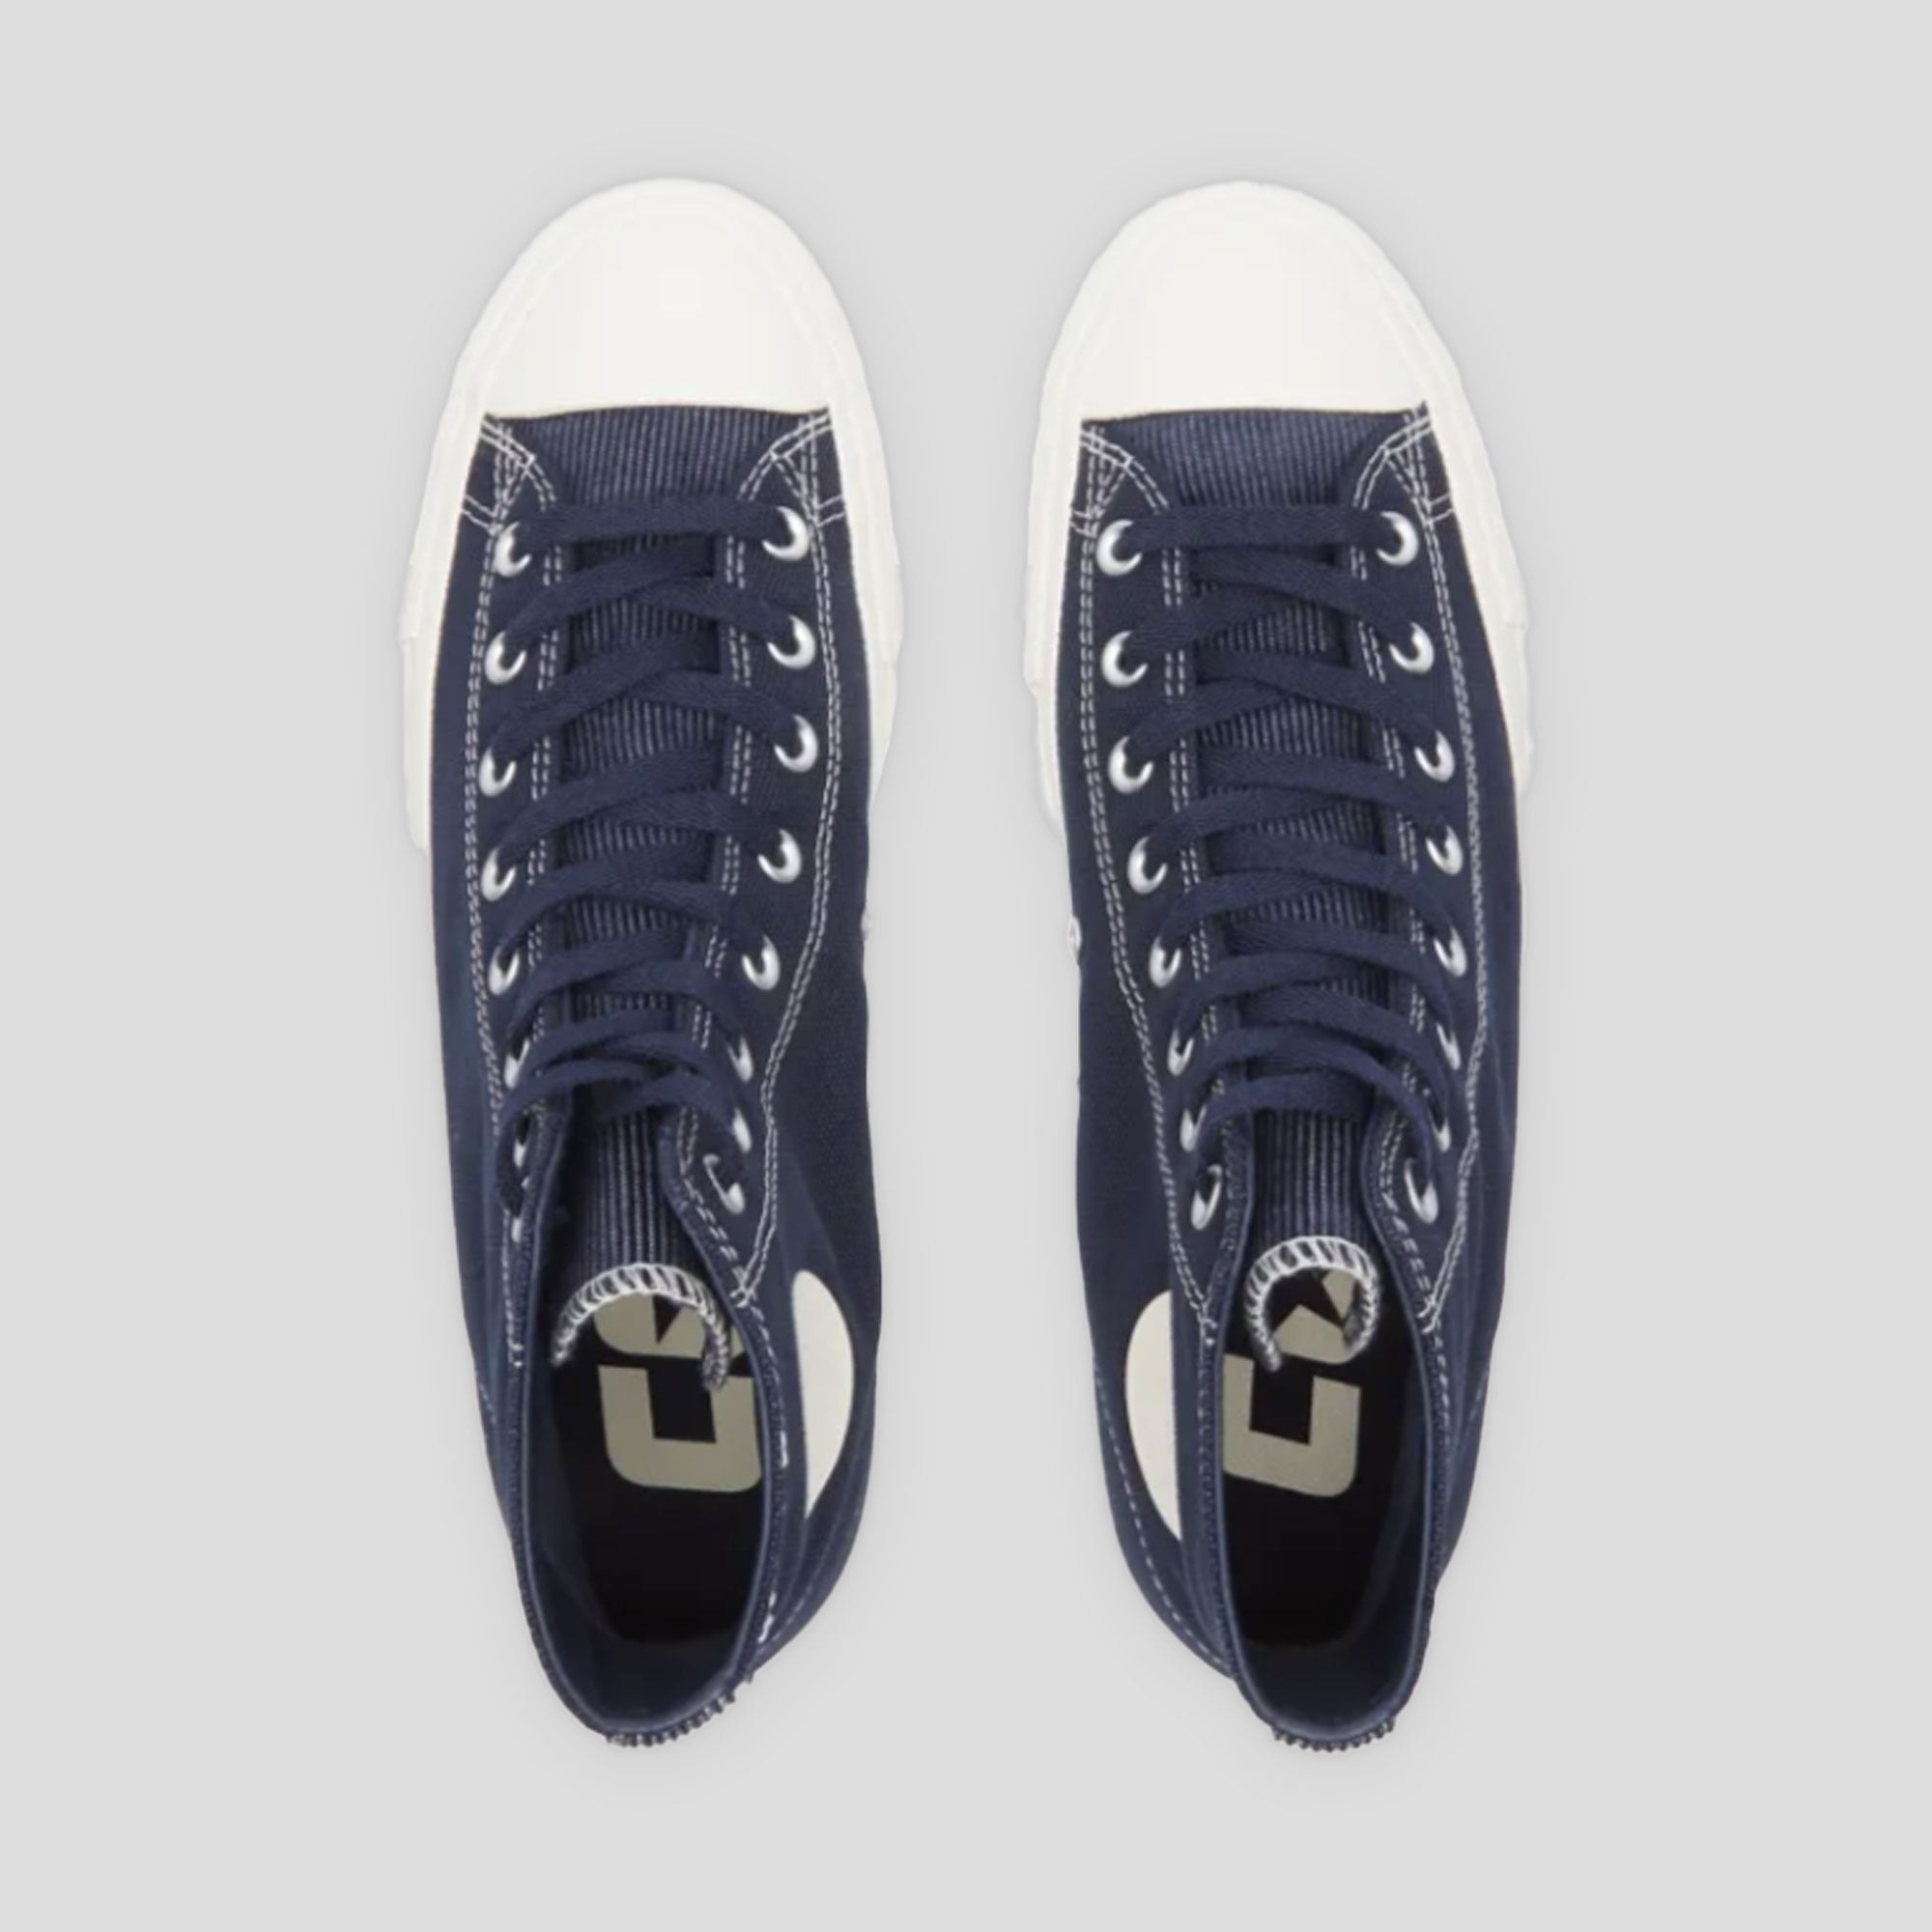 Converse Cons Chuck Taylor All Star Pro High Top - Obsidian Navy / White